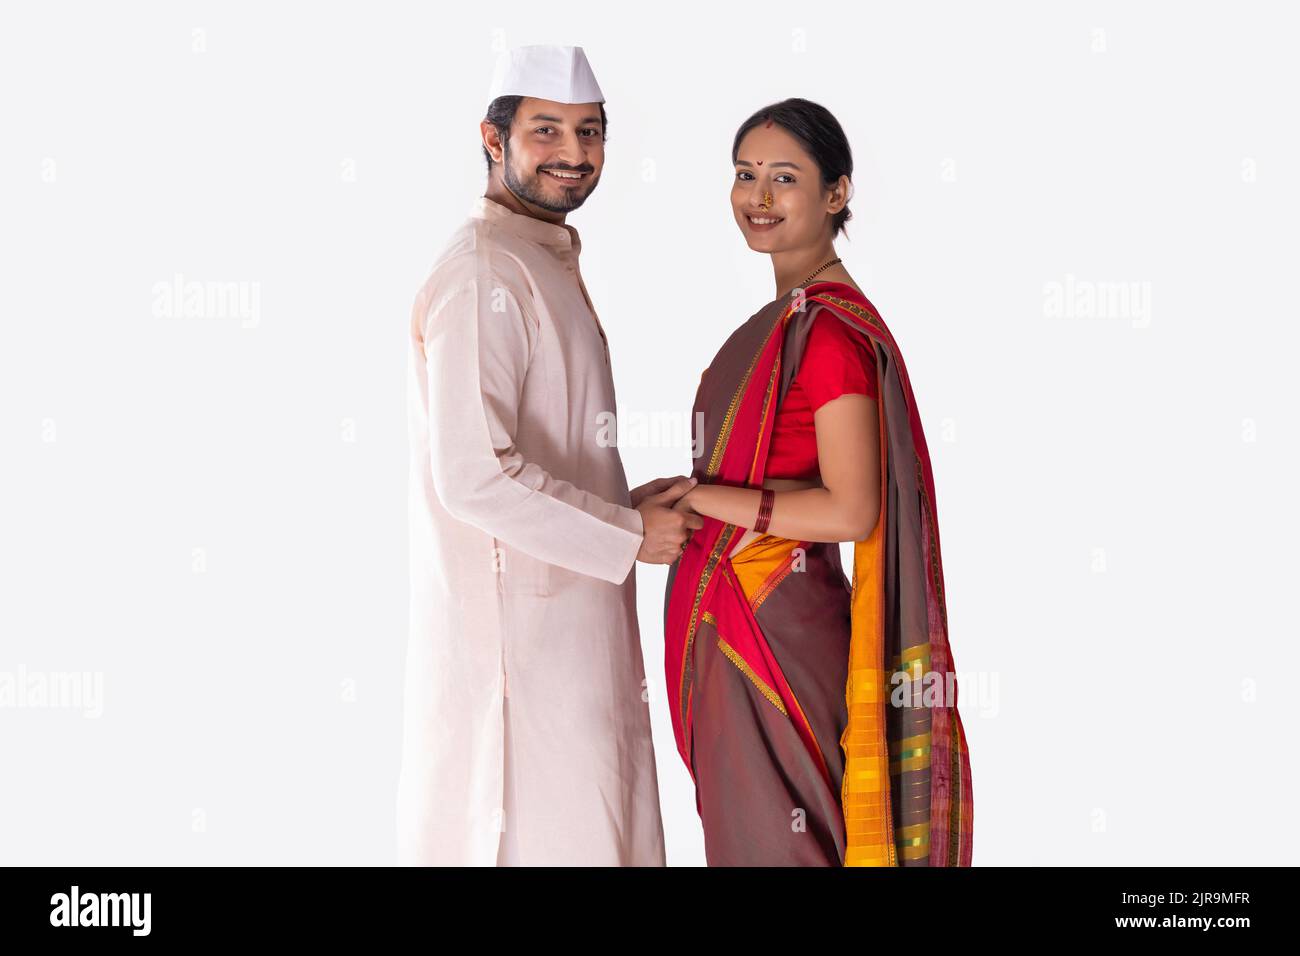 Portrait of Maharashtrian couple standing face to face with holding hands Stock Photo